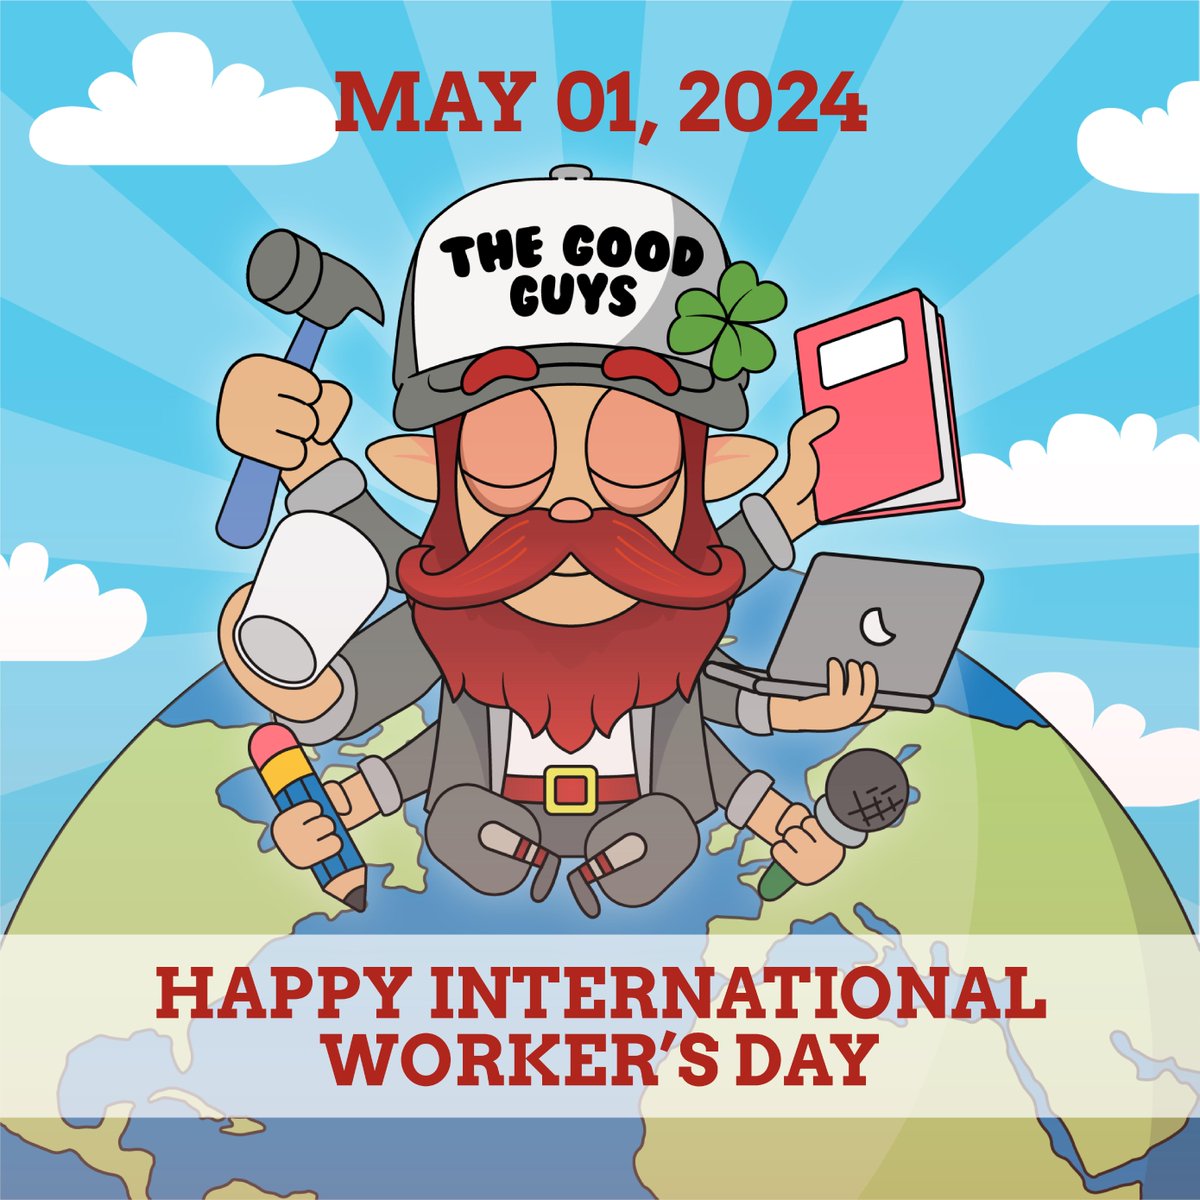 Cheers to the doers, dreamers, and unseen schemers. Happy International Worker's Day! #InternationalWorkersDay #DreamersAndDoers #LaborRights